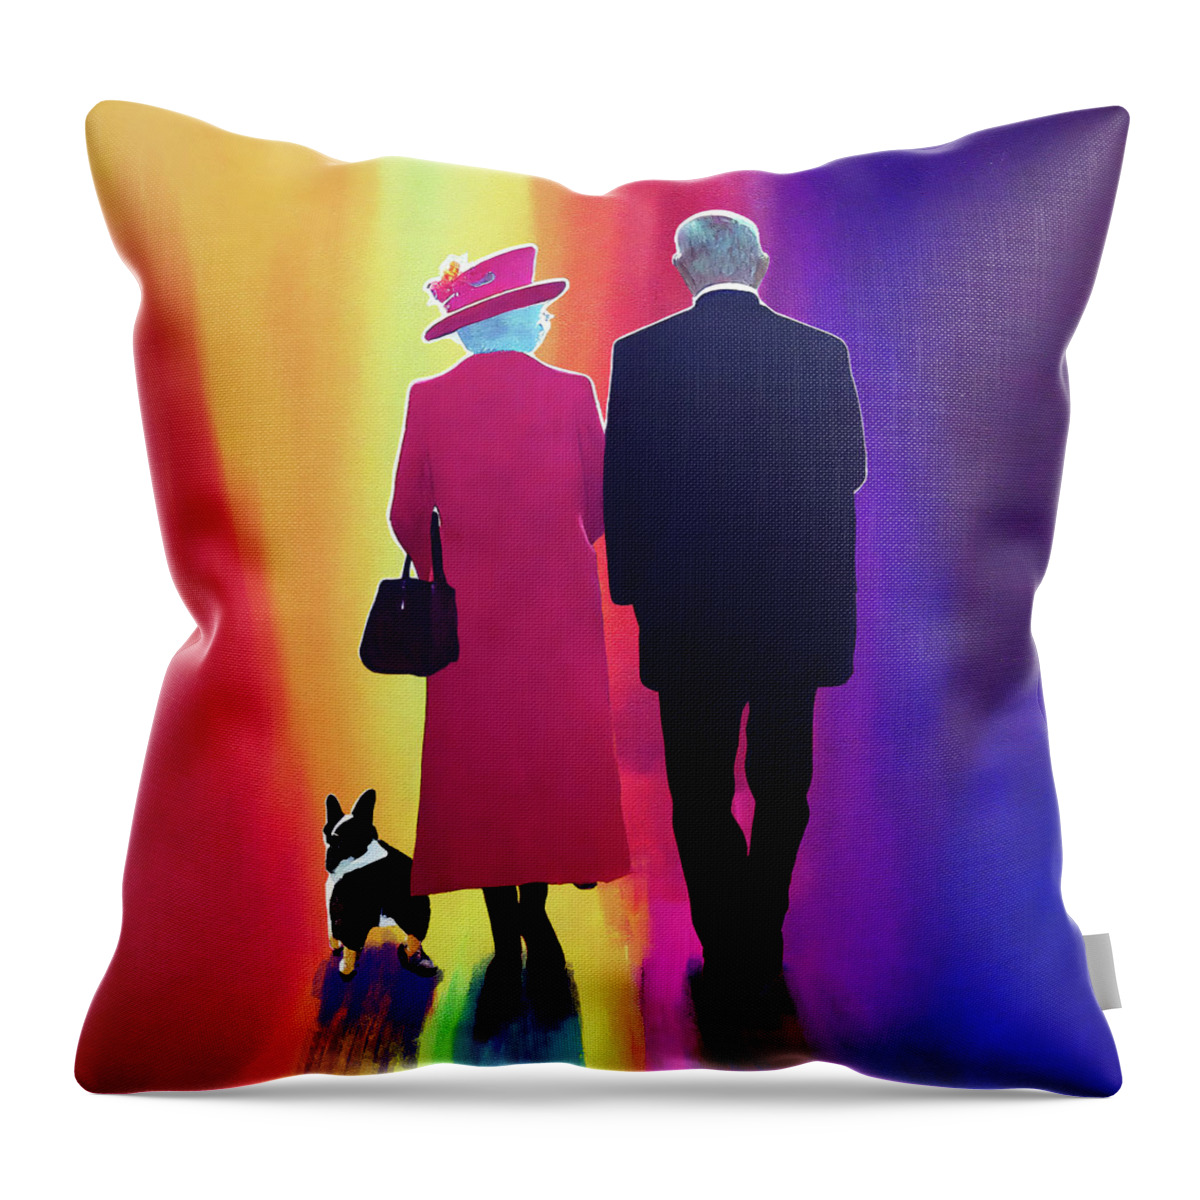 Queen Elizabeth Throw Pillow featuring the digital art Together Again - Queen Elizabeth and Her Prince by Mark Tisdale